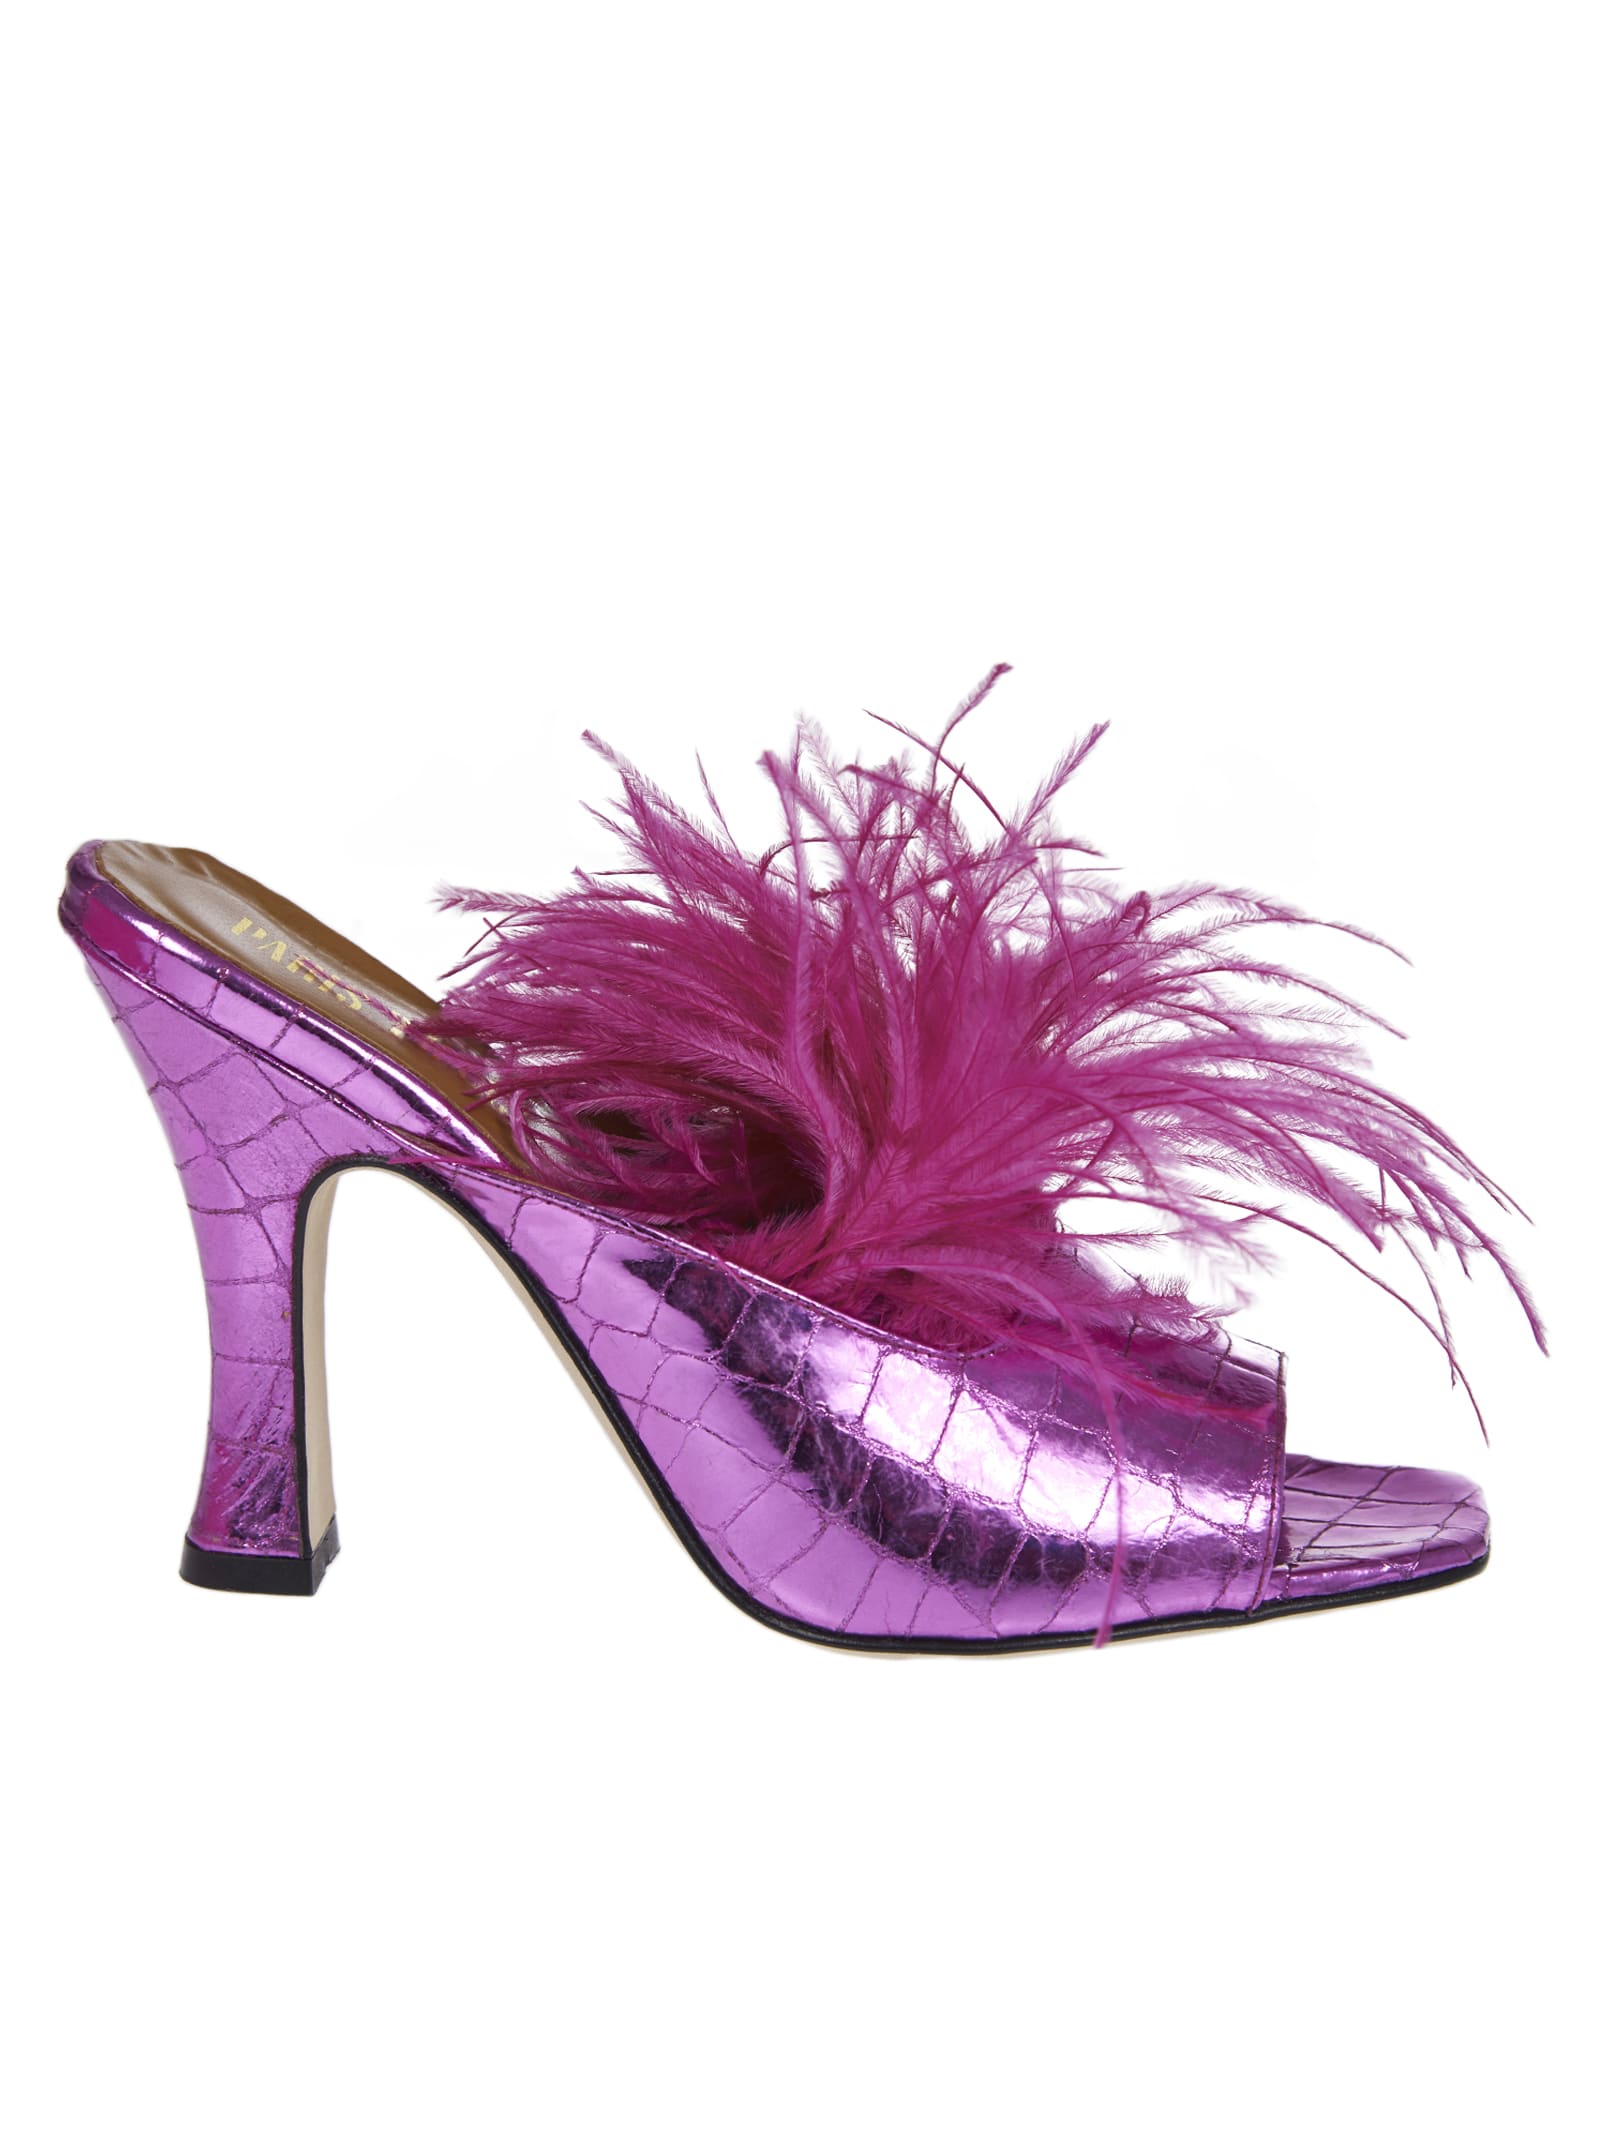 Paris Texas Pink Sabot With Feathers